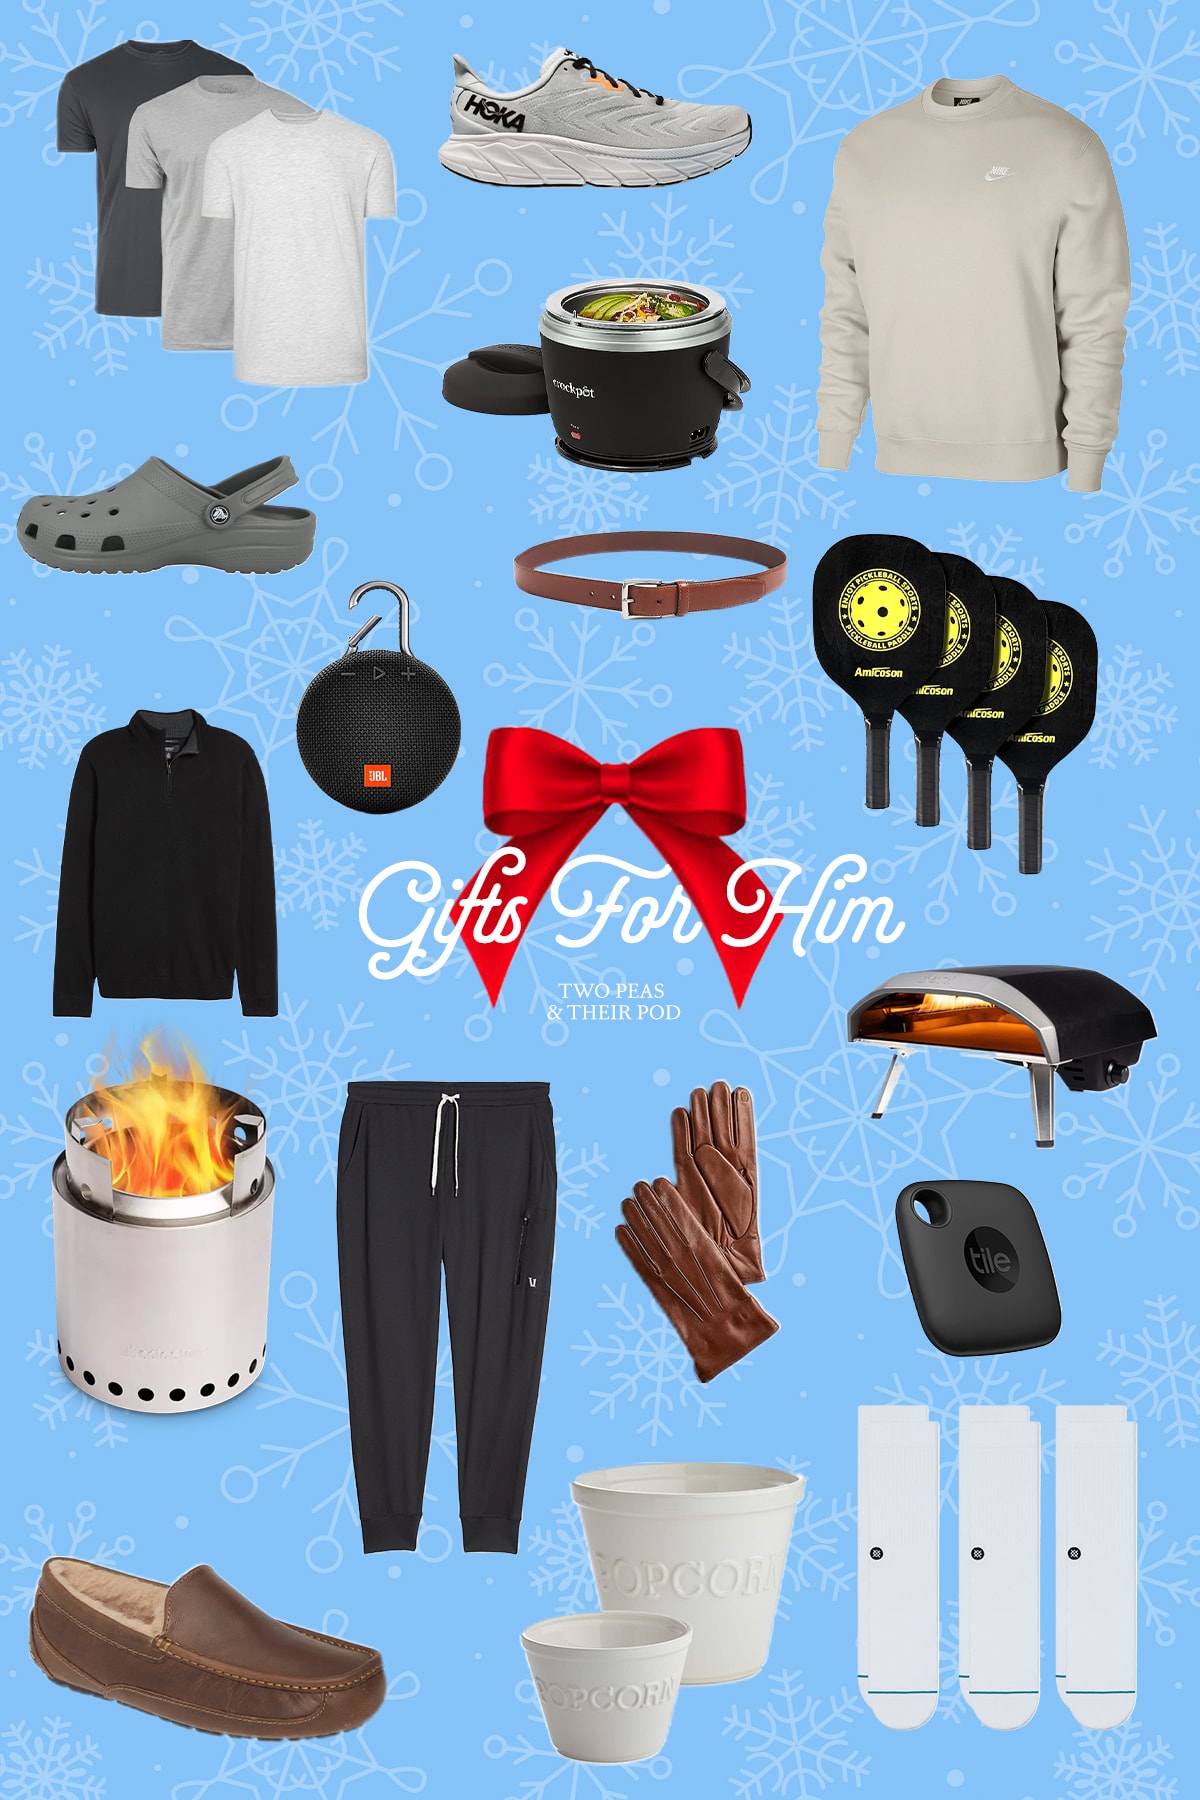 2023 Gift Guide: For Him